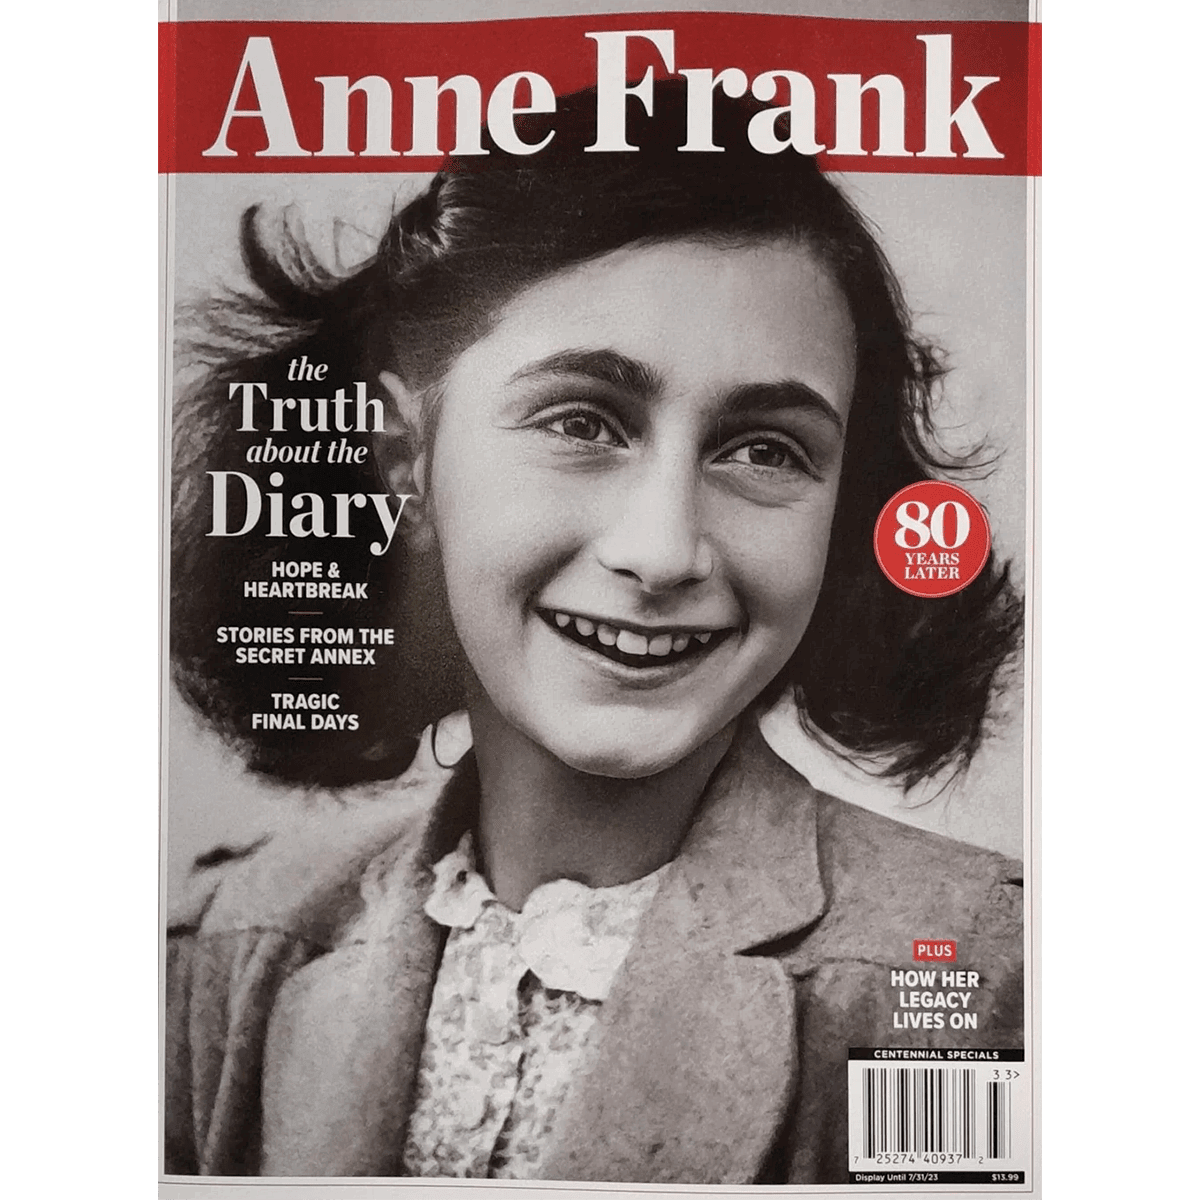 Anne Frank Magazine The Truth About The Diary – Inspired by Anne Frank